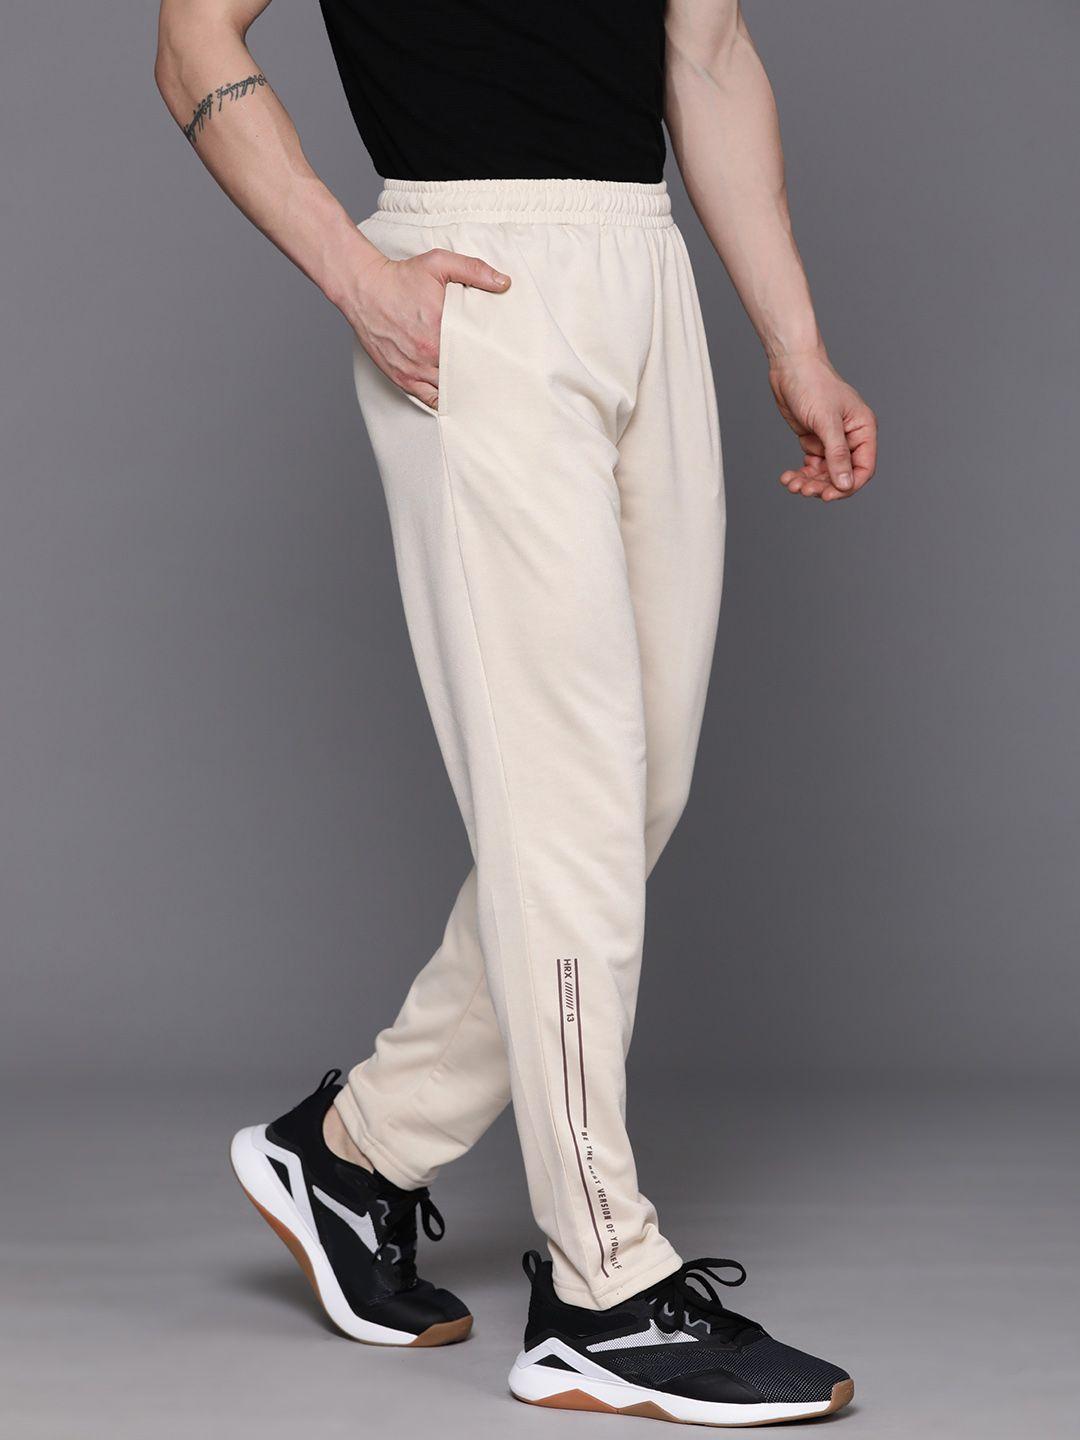 hrx-by-hrithik-roshan-men-lifestyle-track-pants-with-placement-typography